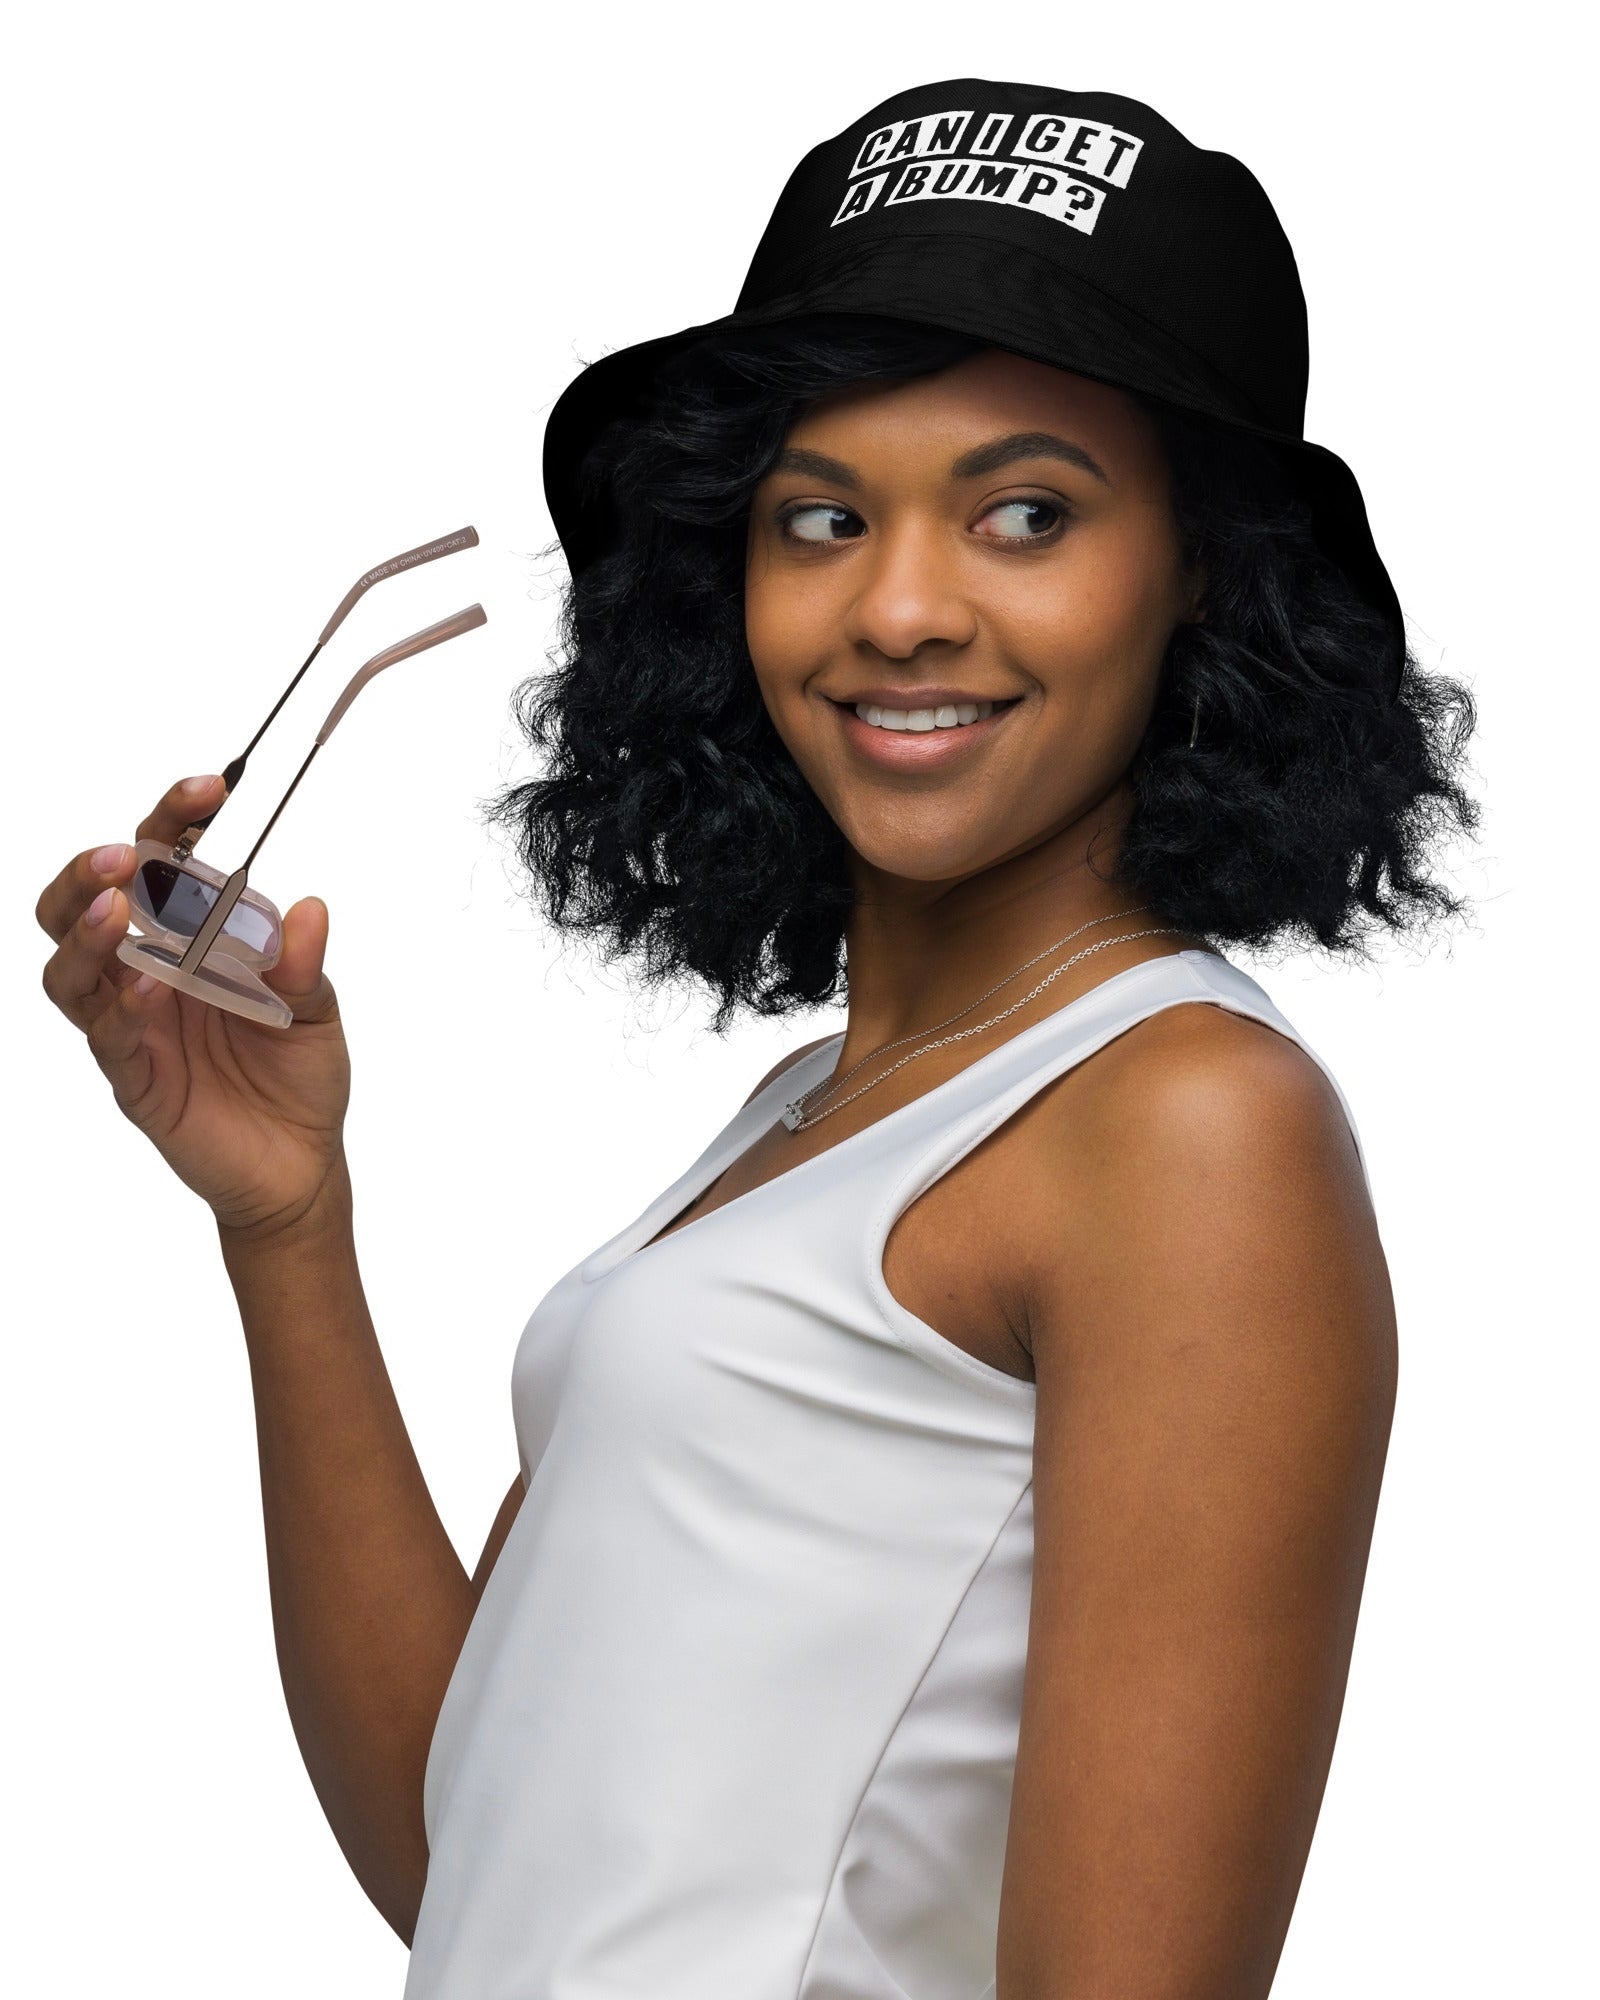 Model wearing a black bucket hat with the phrase "CAN I GET A BUMP?".